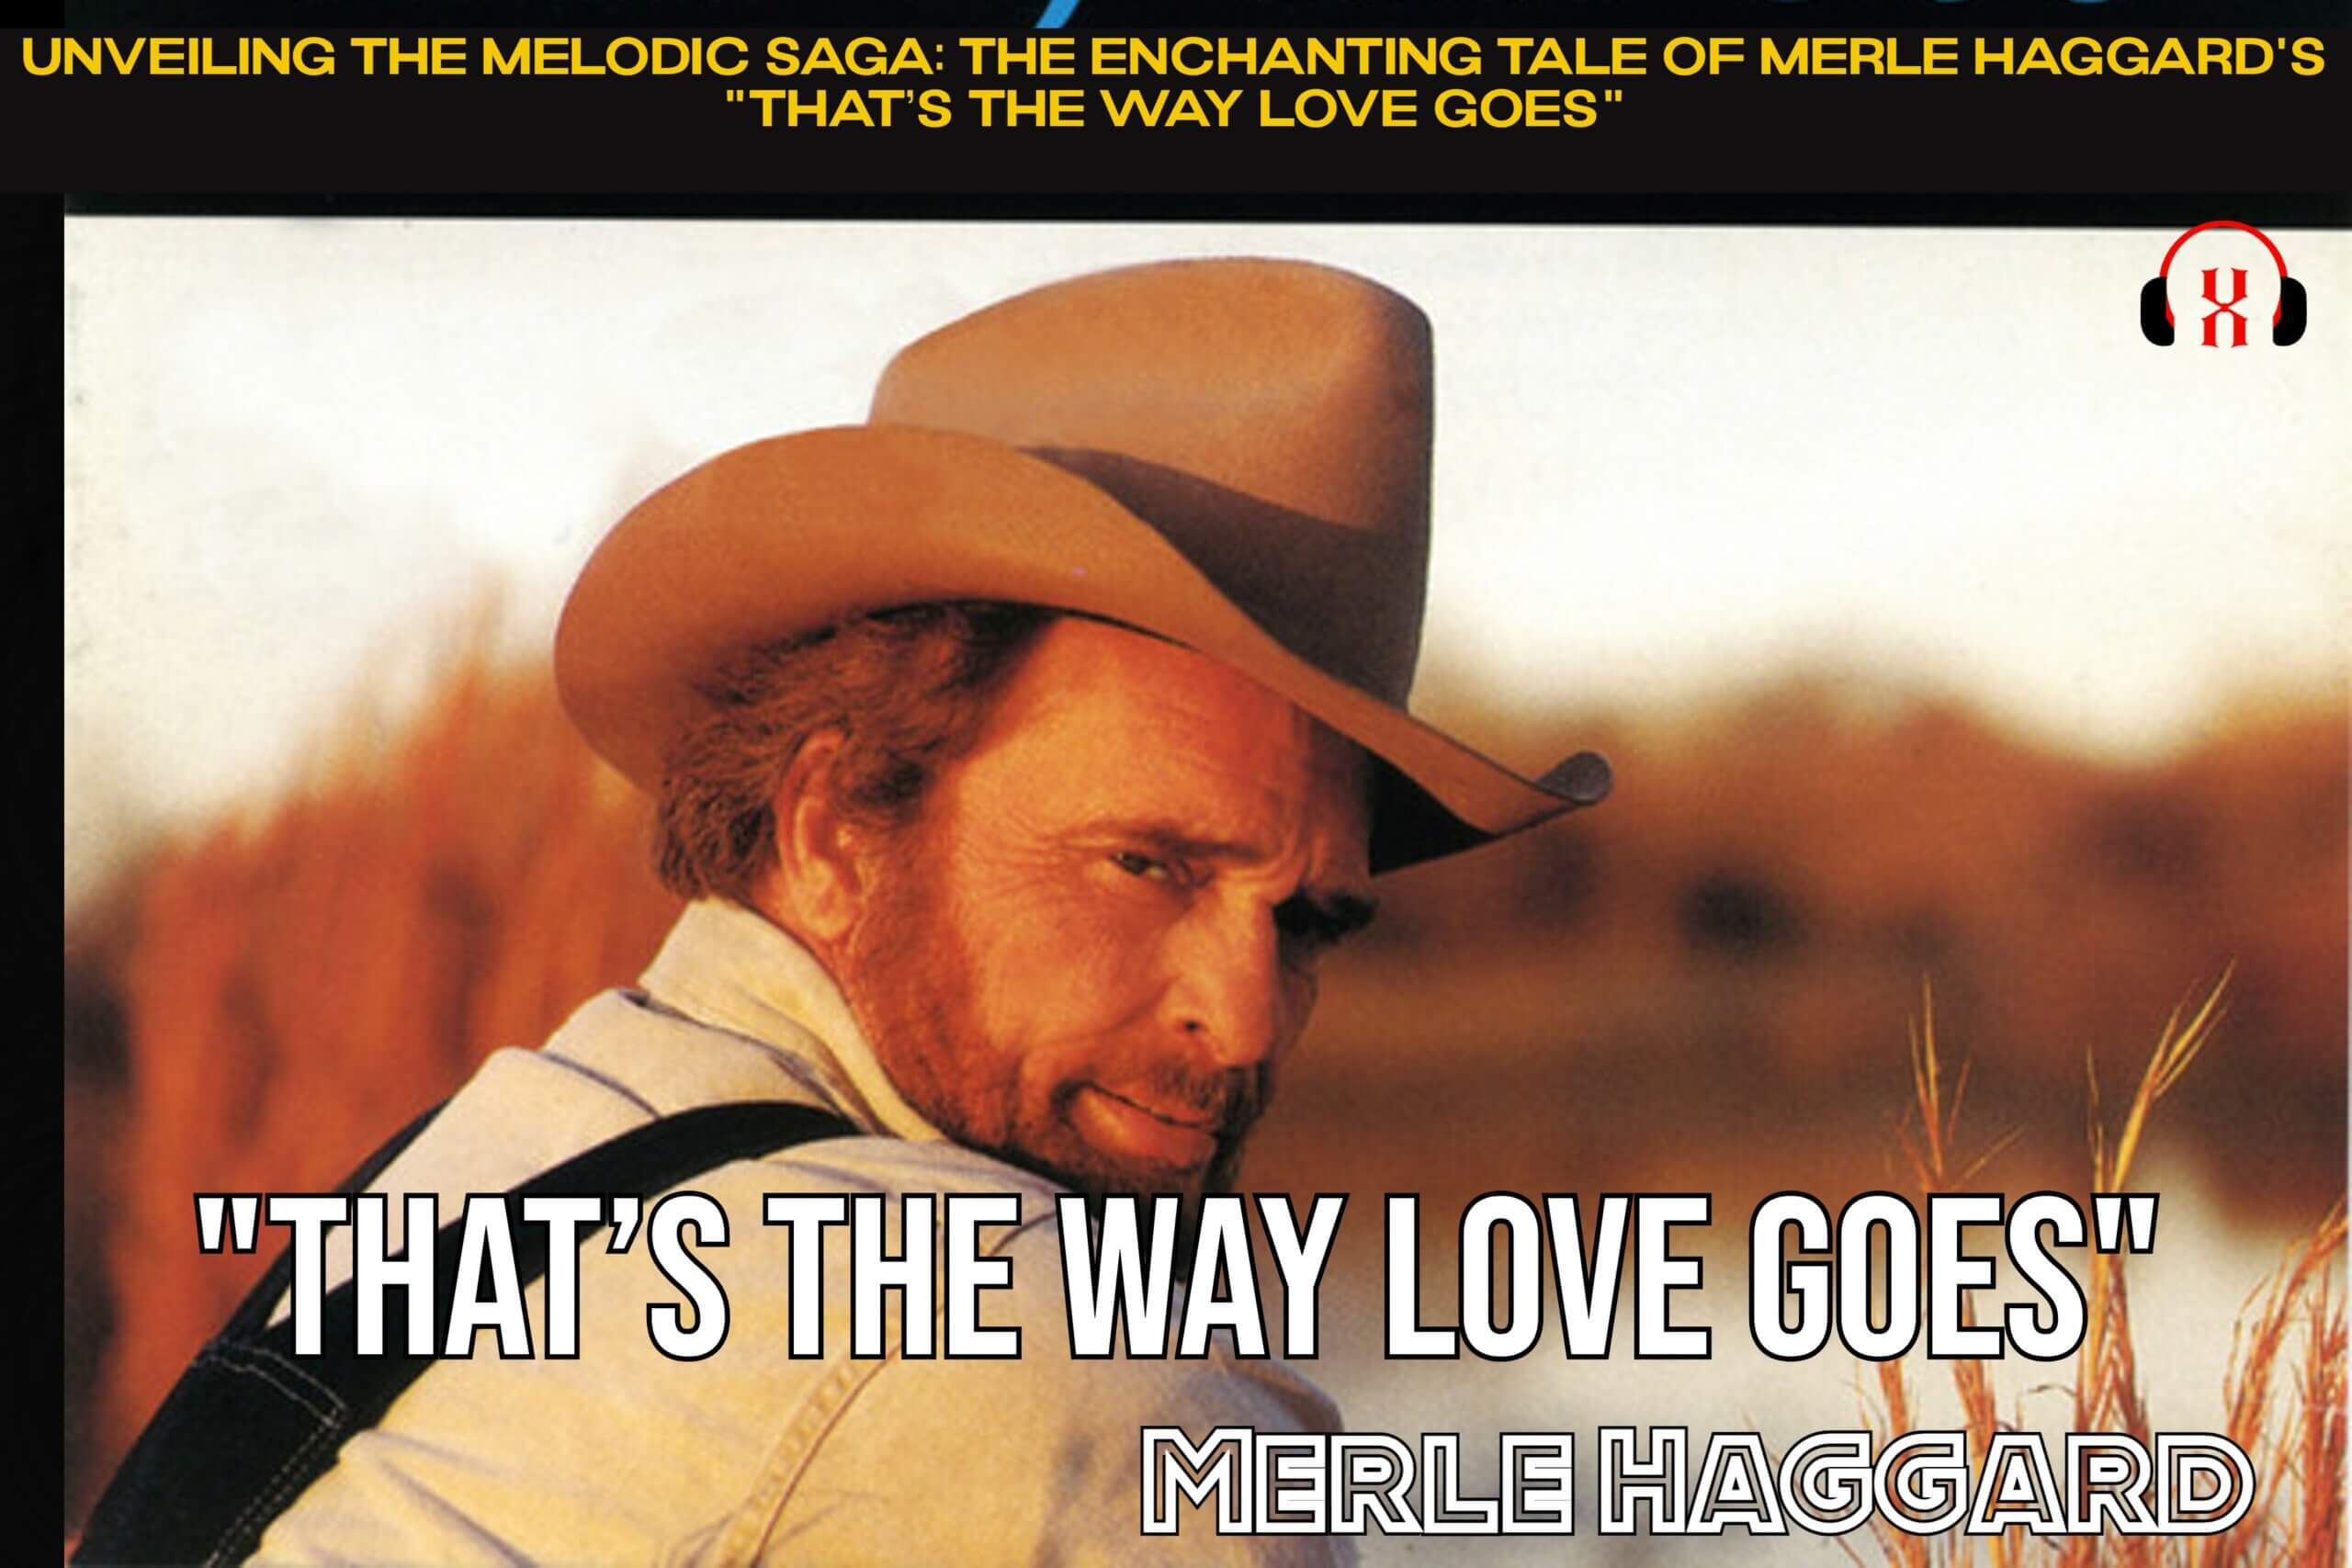 Unveiling the Melodic Saga: The Enchanting Tale of Merle Haggard's "That’s the Way Love Goes"